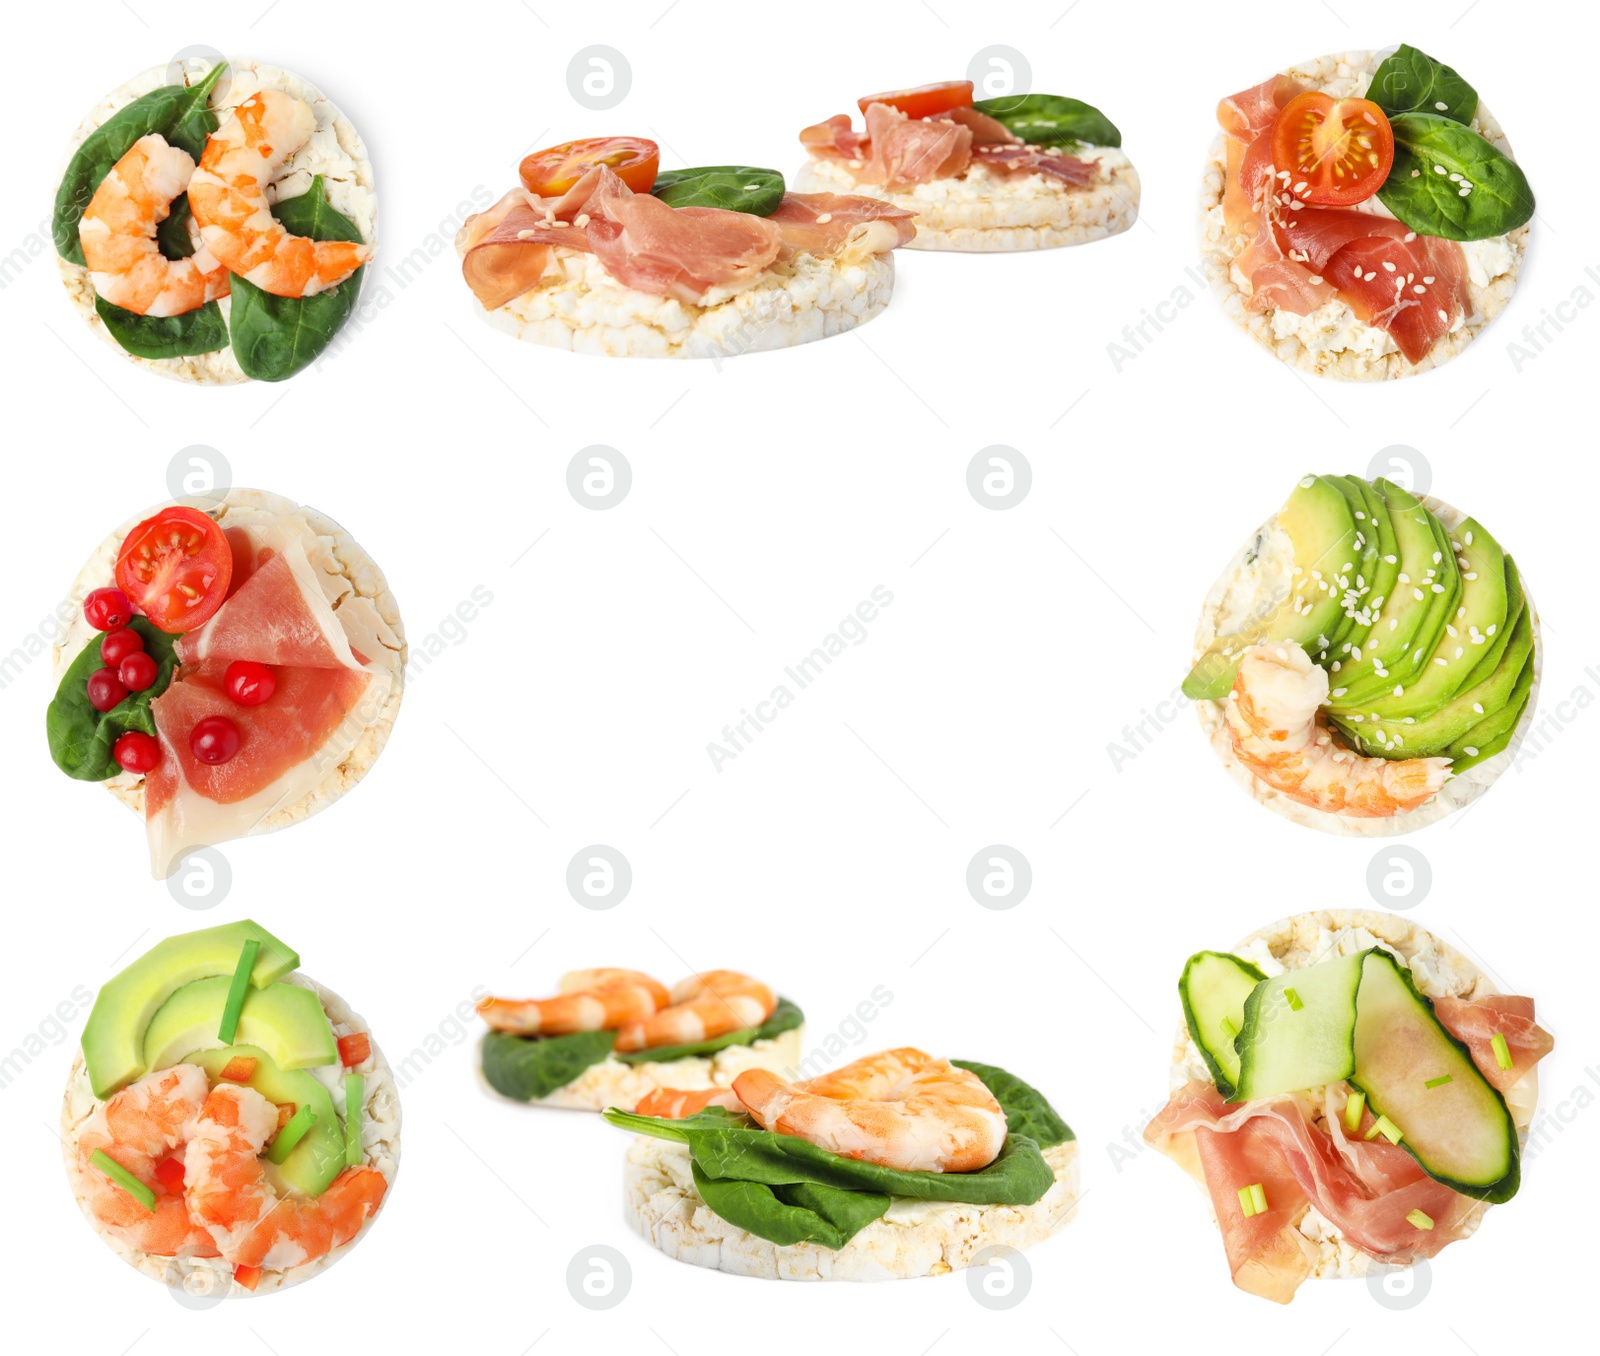 Image of Frame of puffed corn cakes with different toppings on white background